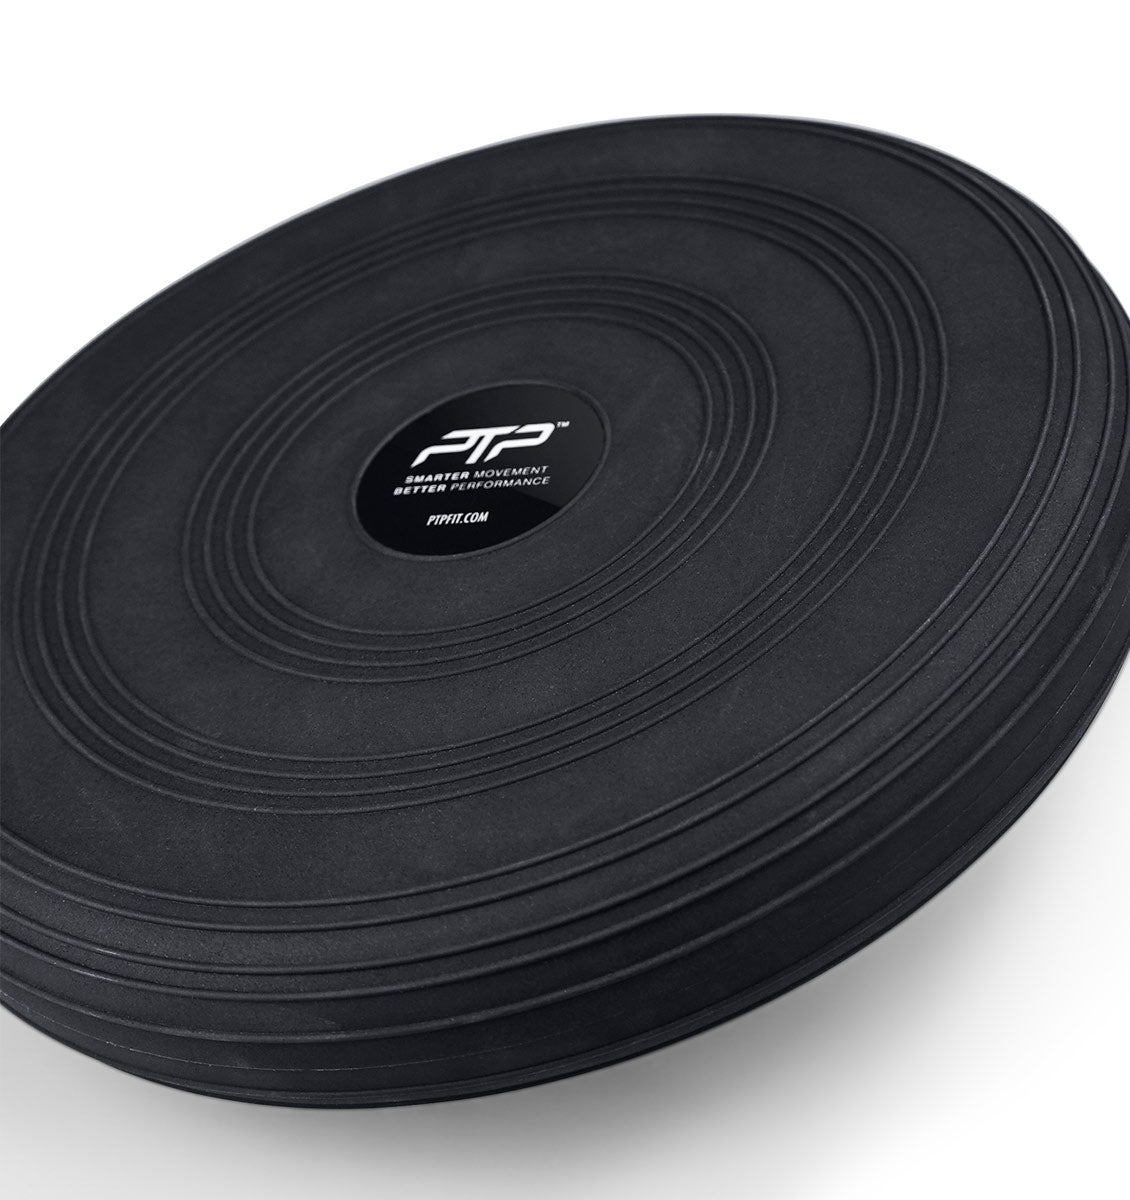 PTP Stability Disc - 2